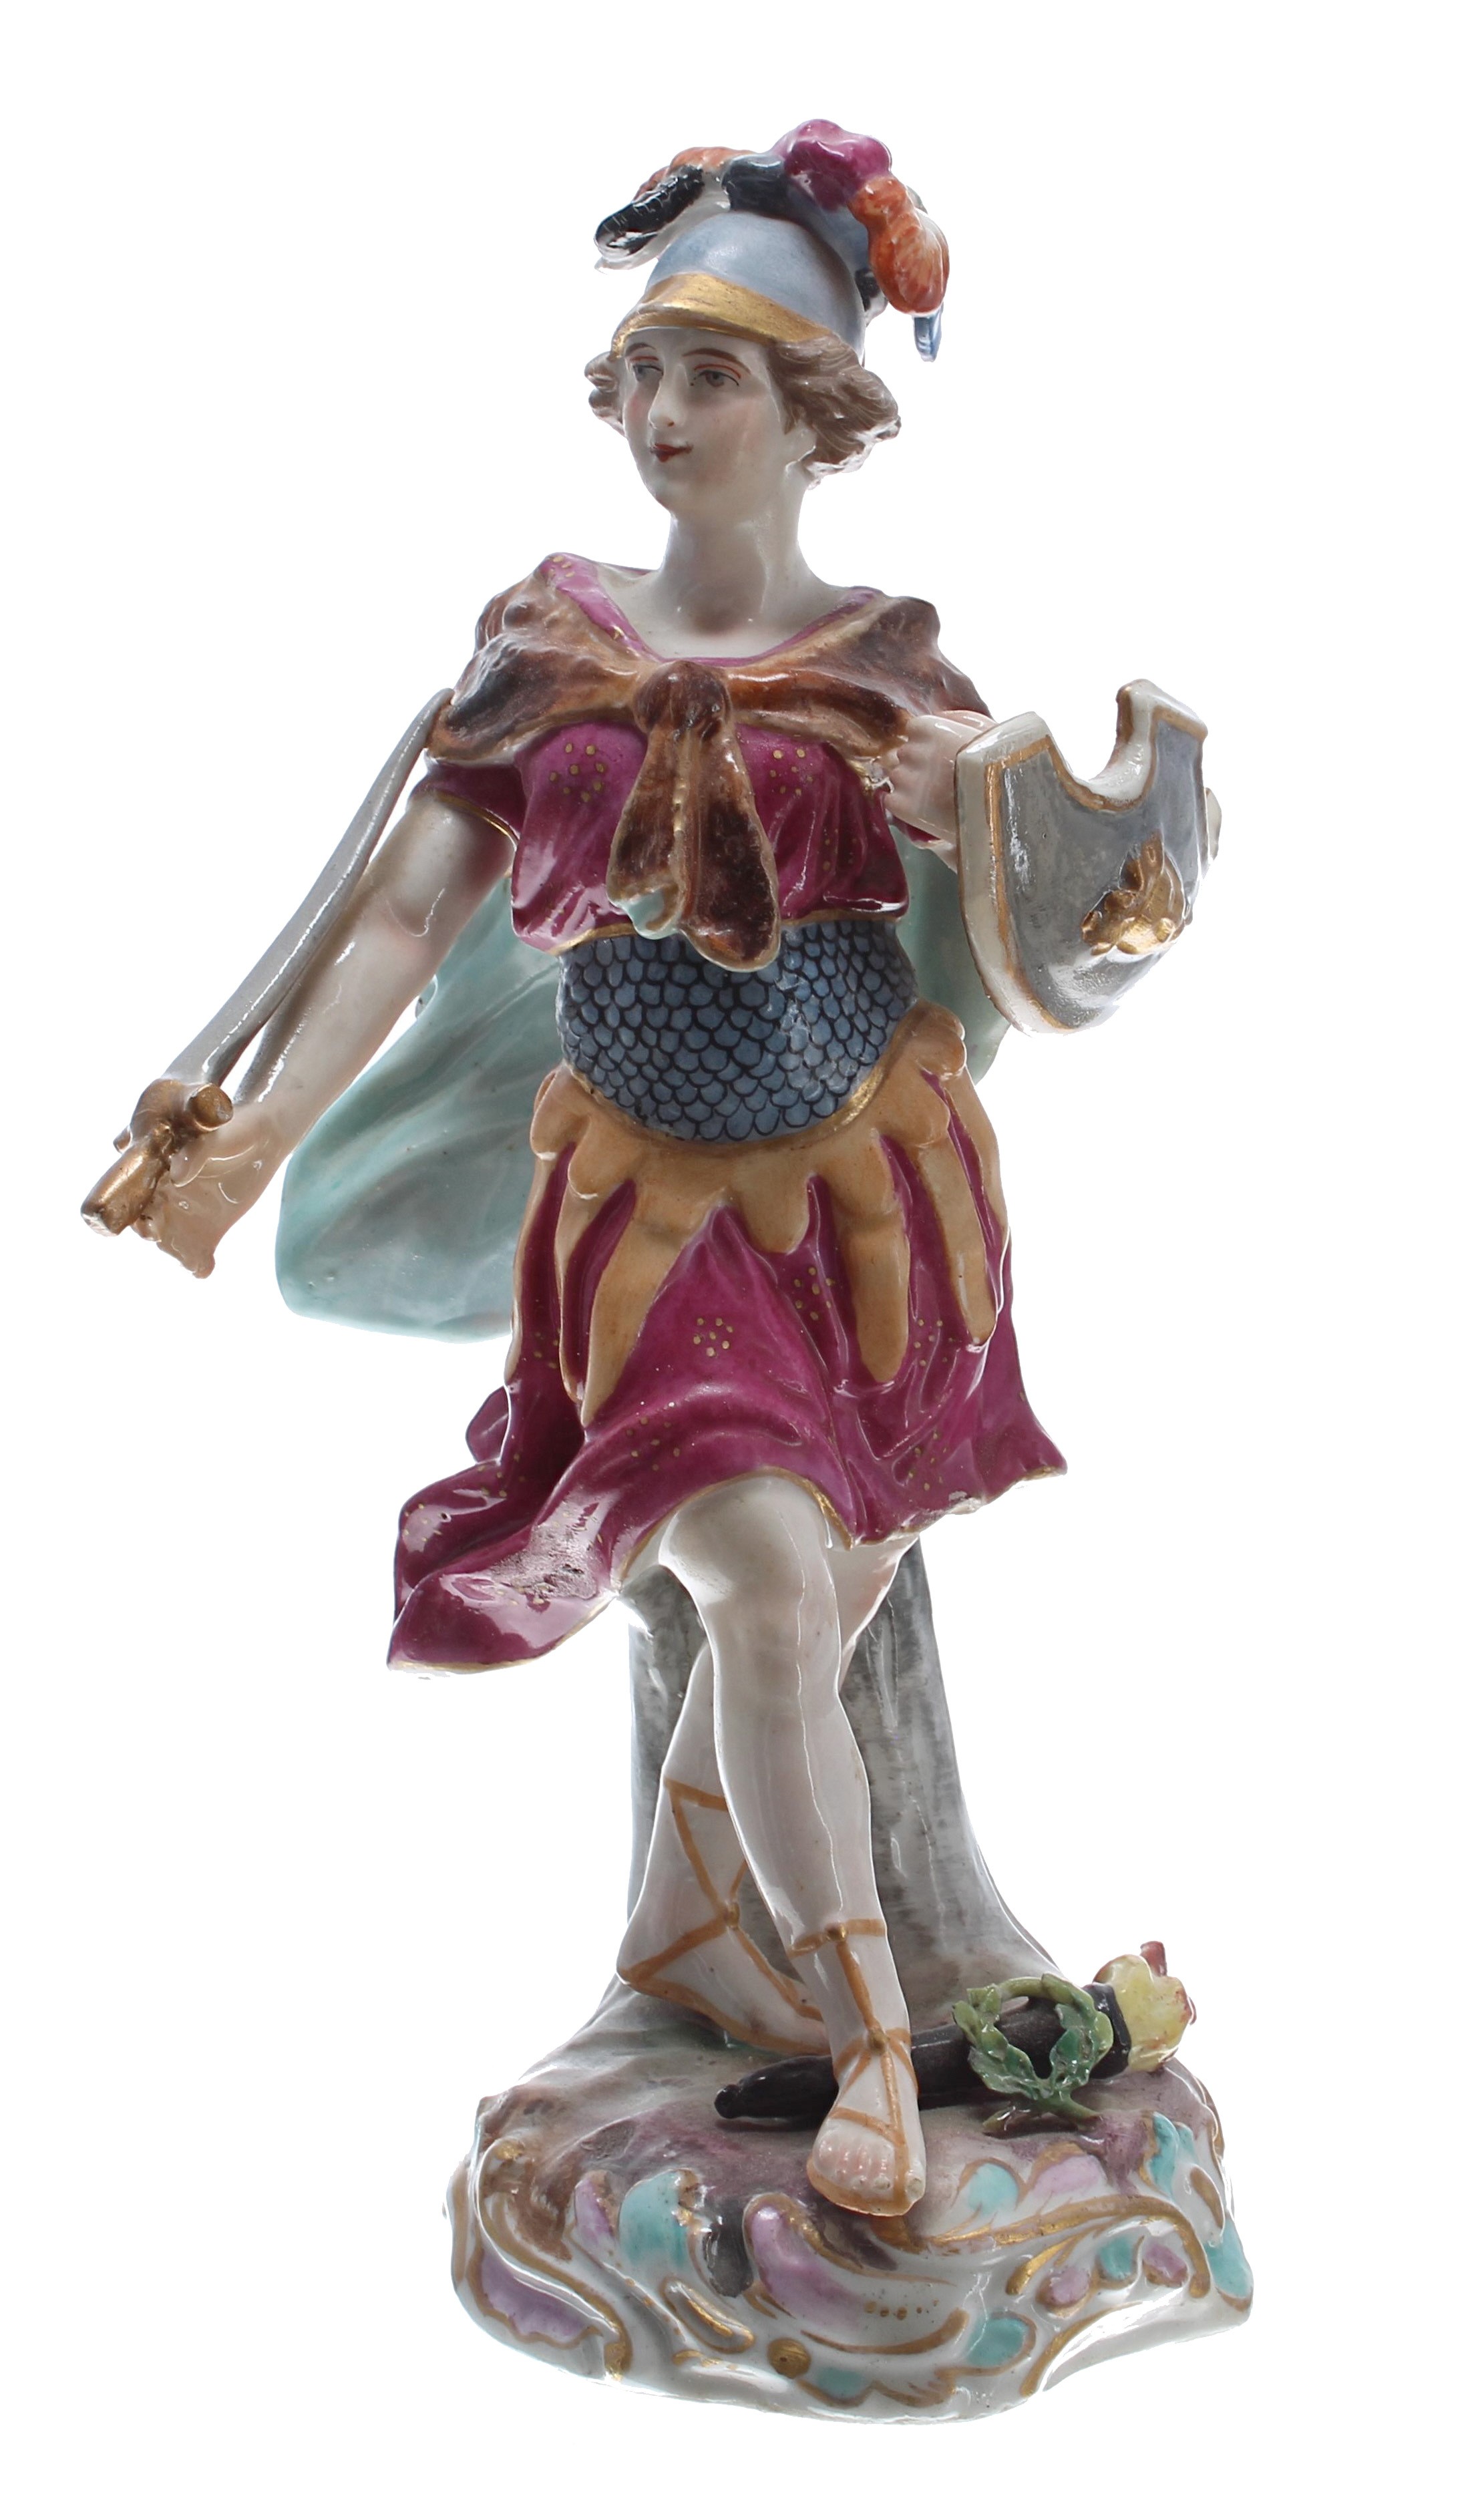 Porcelain figure of a Roman soldier in the manner of Meissen, with sword and shield, wearing a